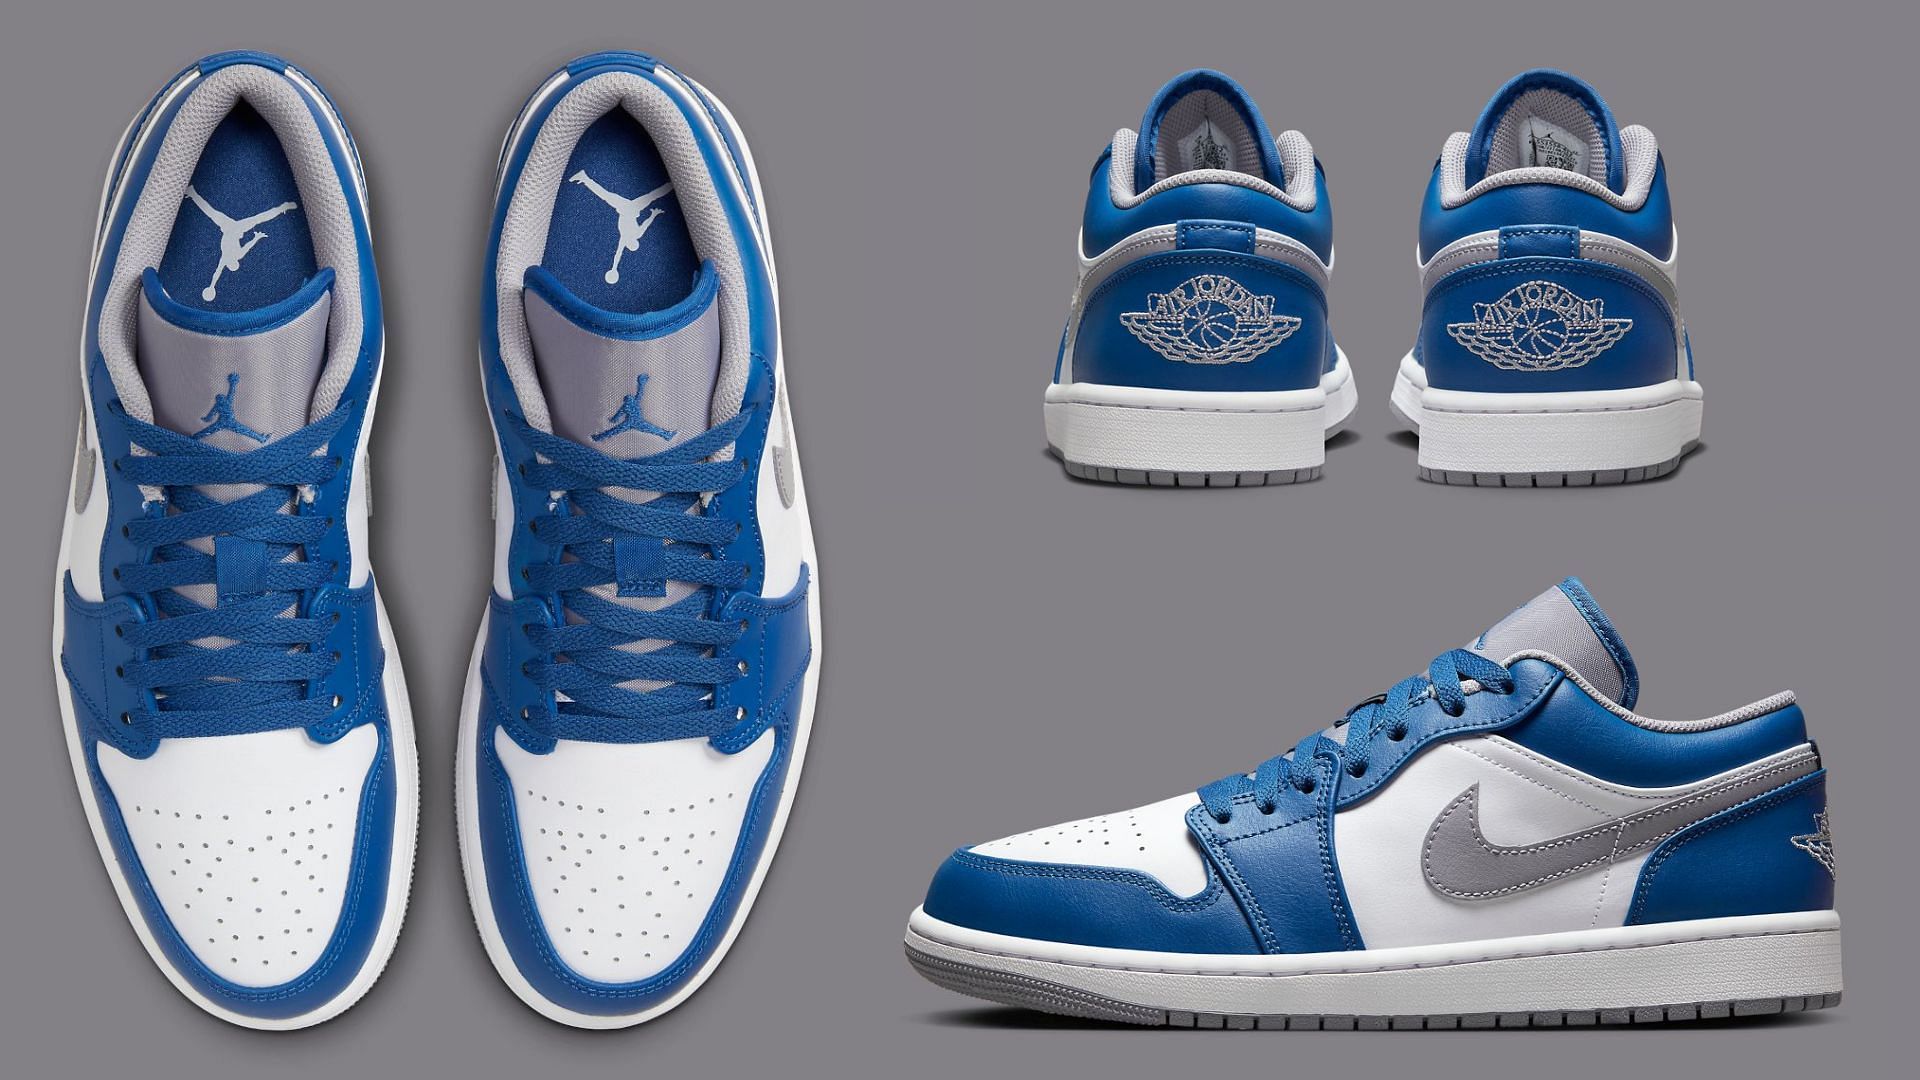 Where to buy Air Jordan 1 Low True Blue shoes? Price and more